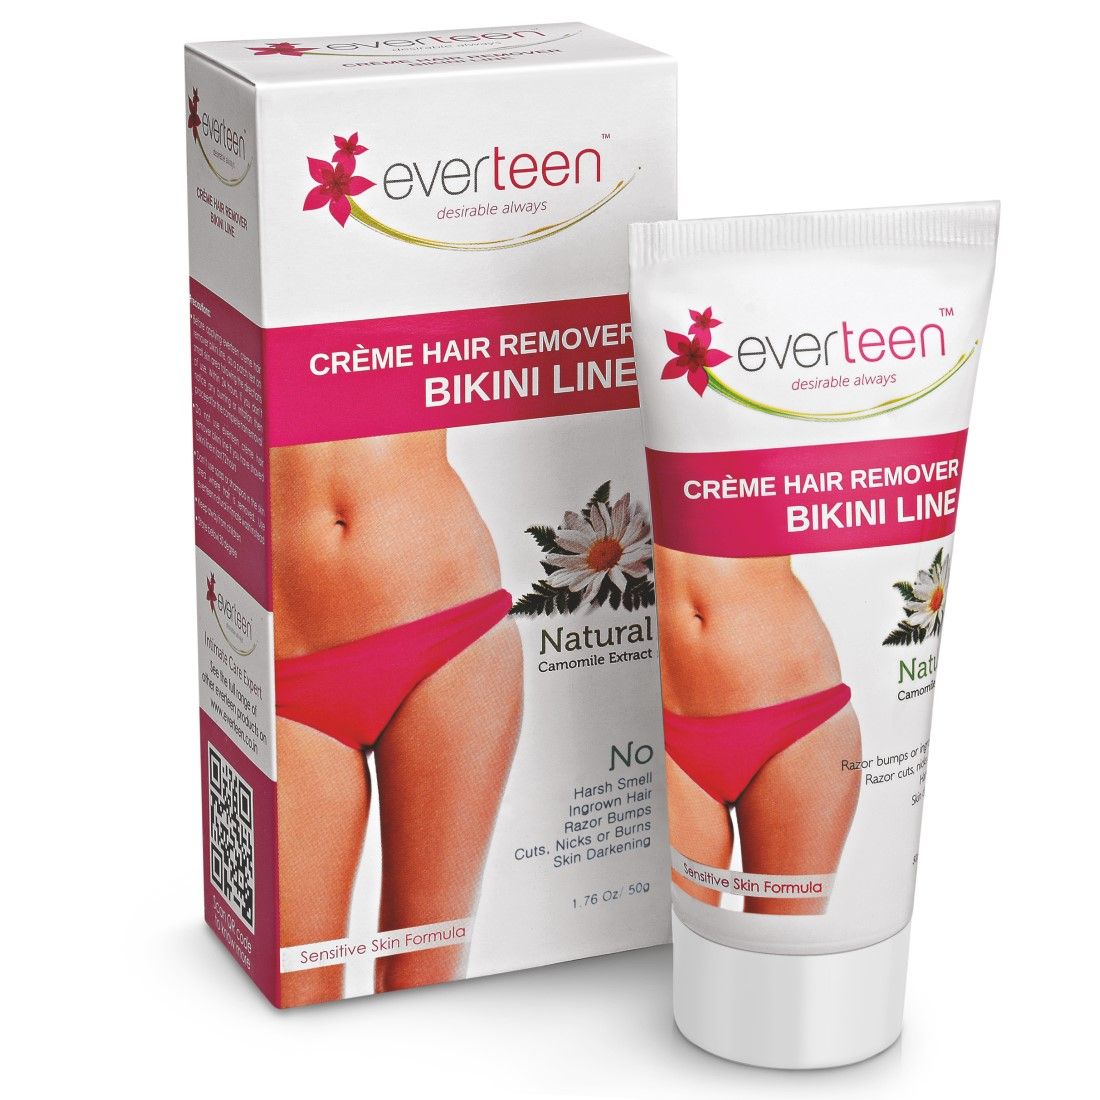 everteen Hair Removal Creme Bikini Line for Sensitive Parts in Women - 1 Pack (50 g)